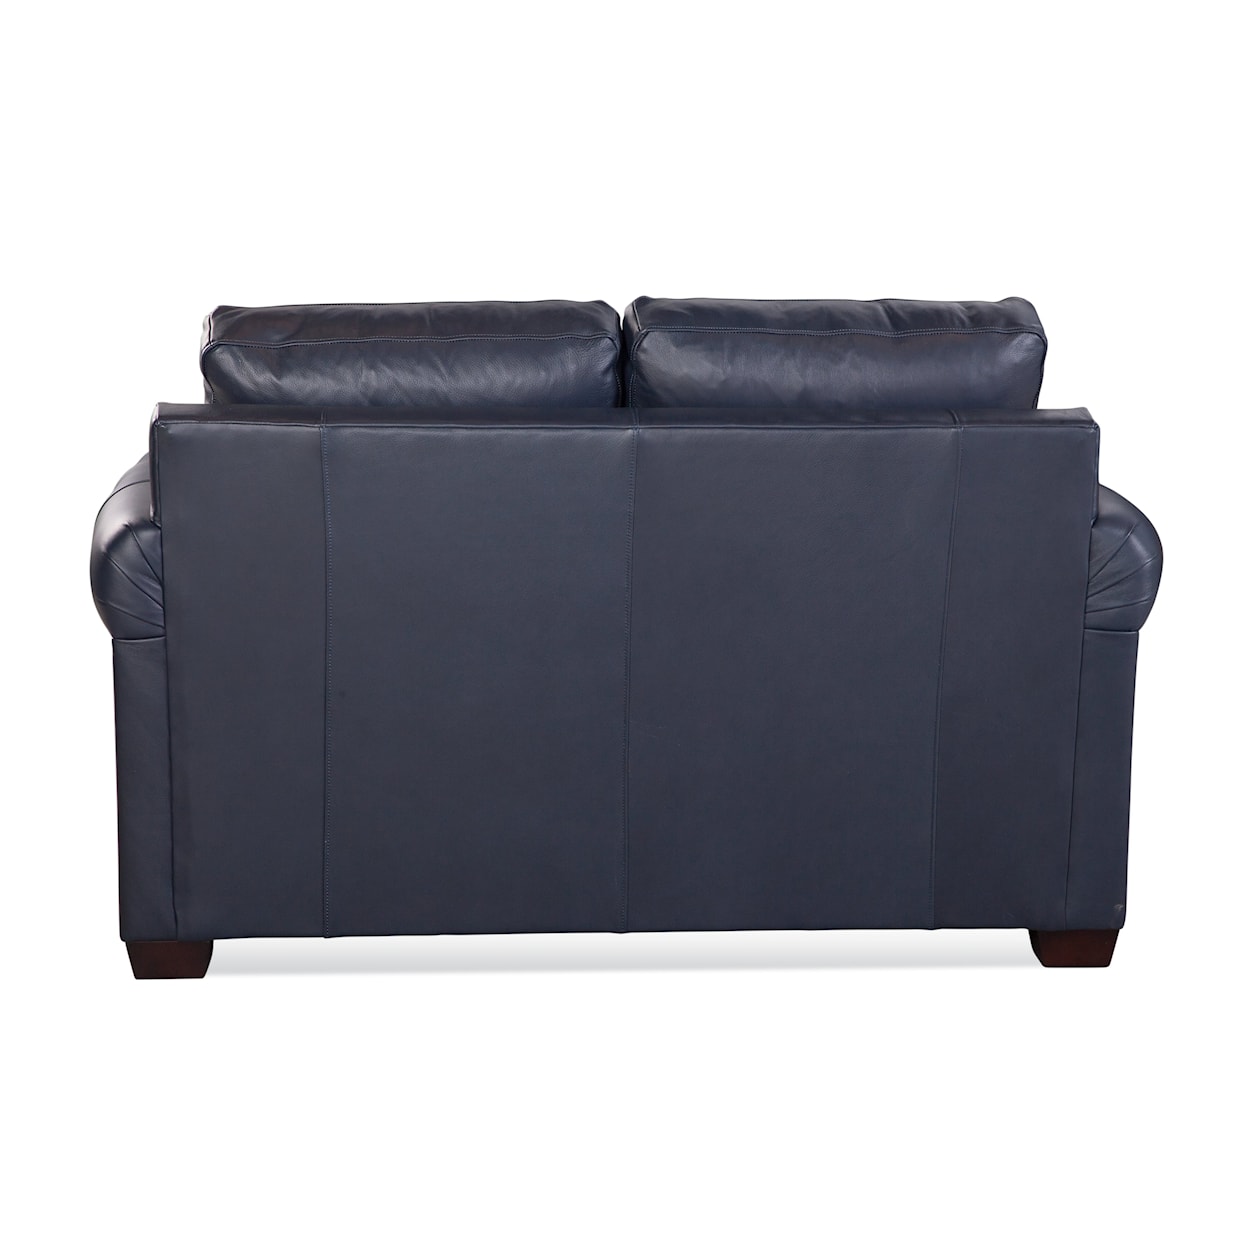 Braxton Culler Bedford Bedford Leather Loveseat